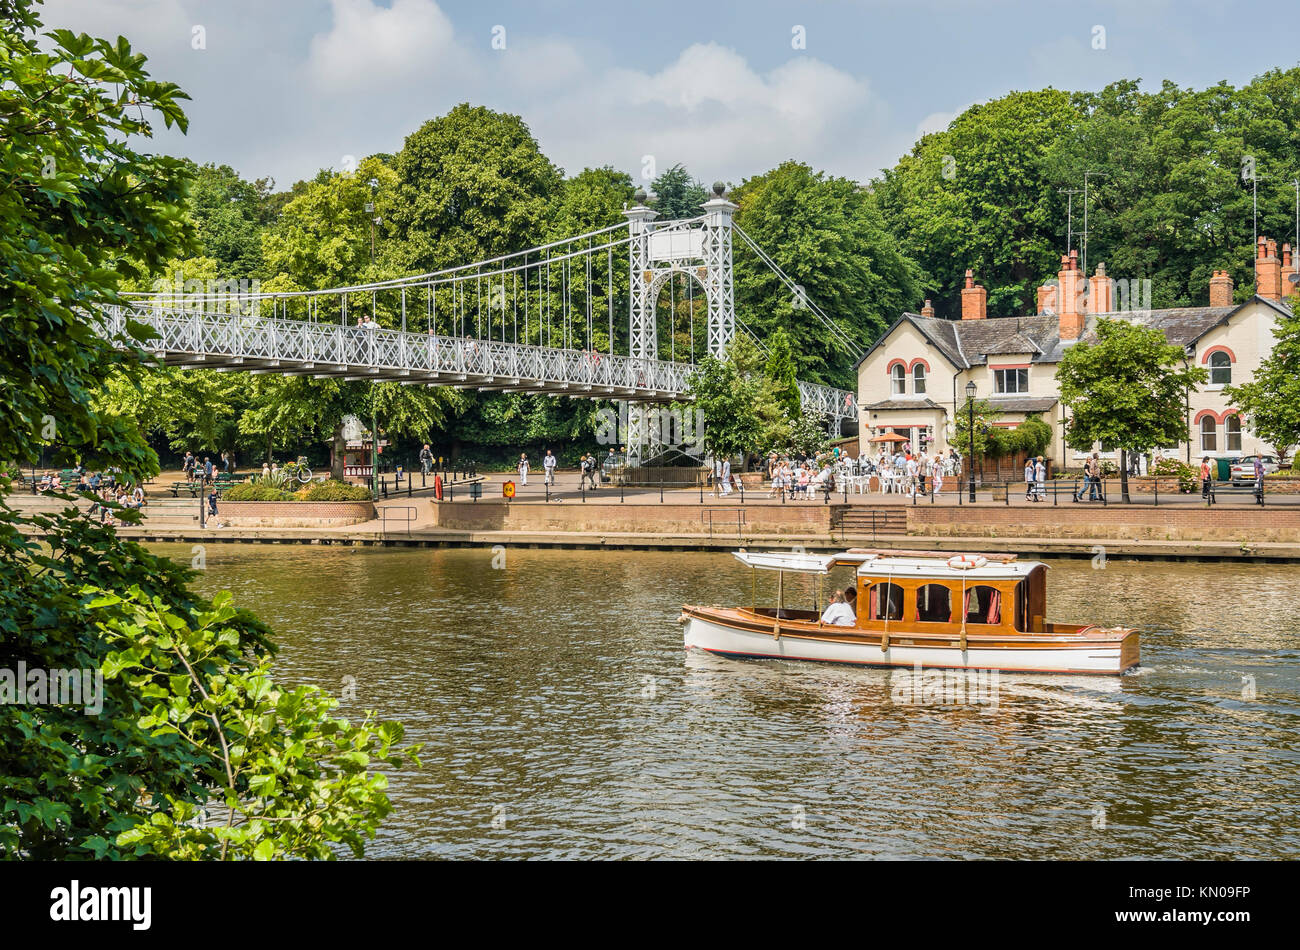 Sightseeing boat at the River Dee in Chester, Chesire, England, UK Stock Photo